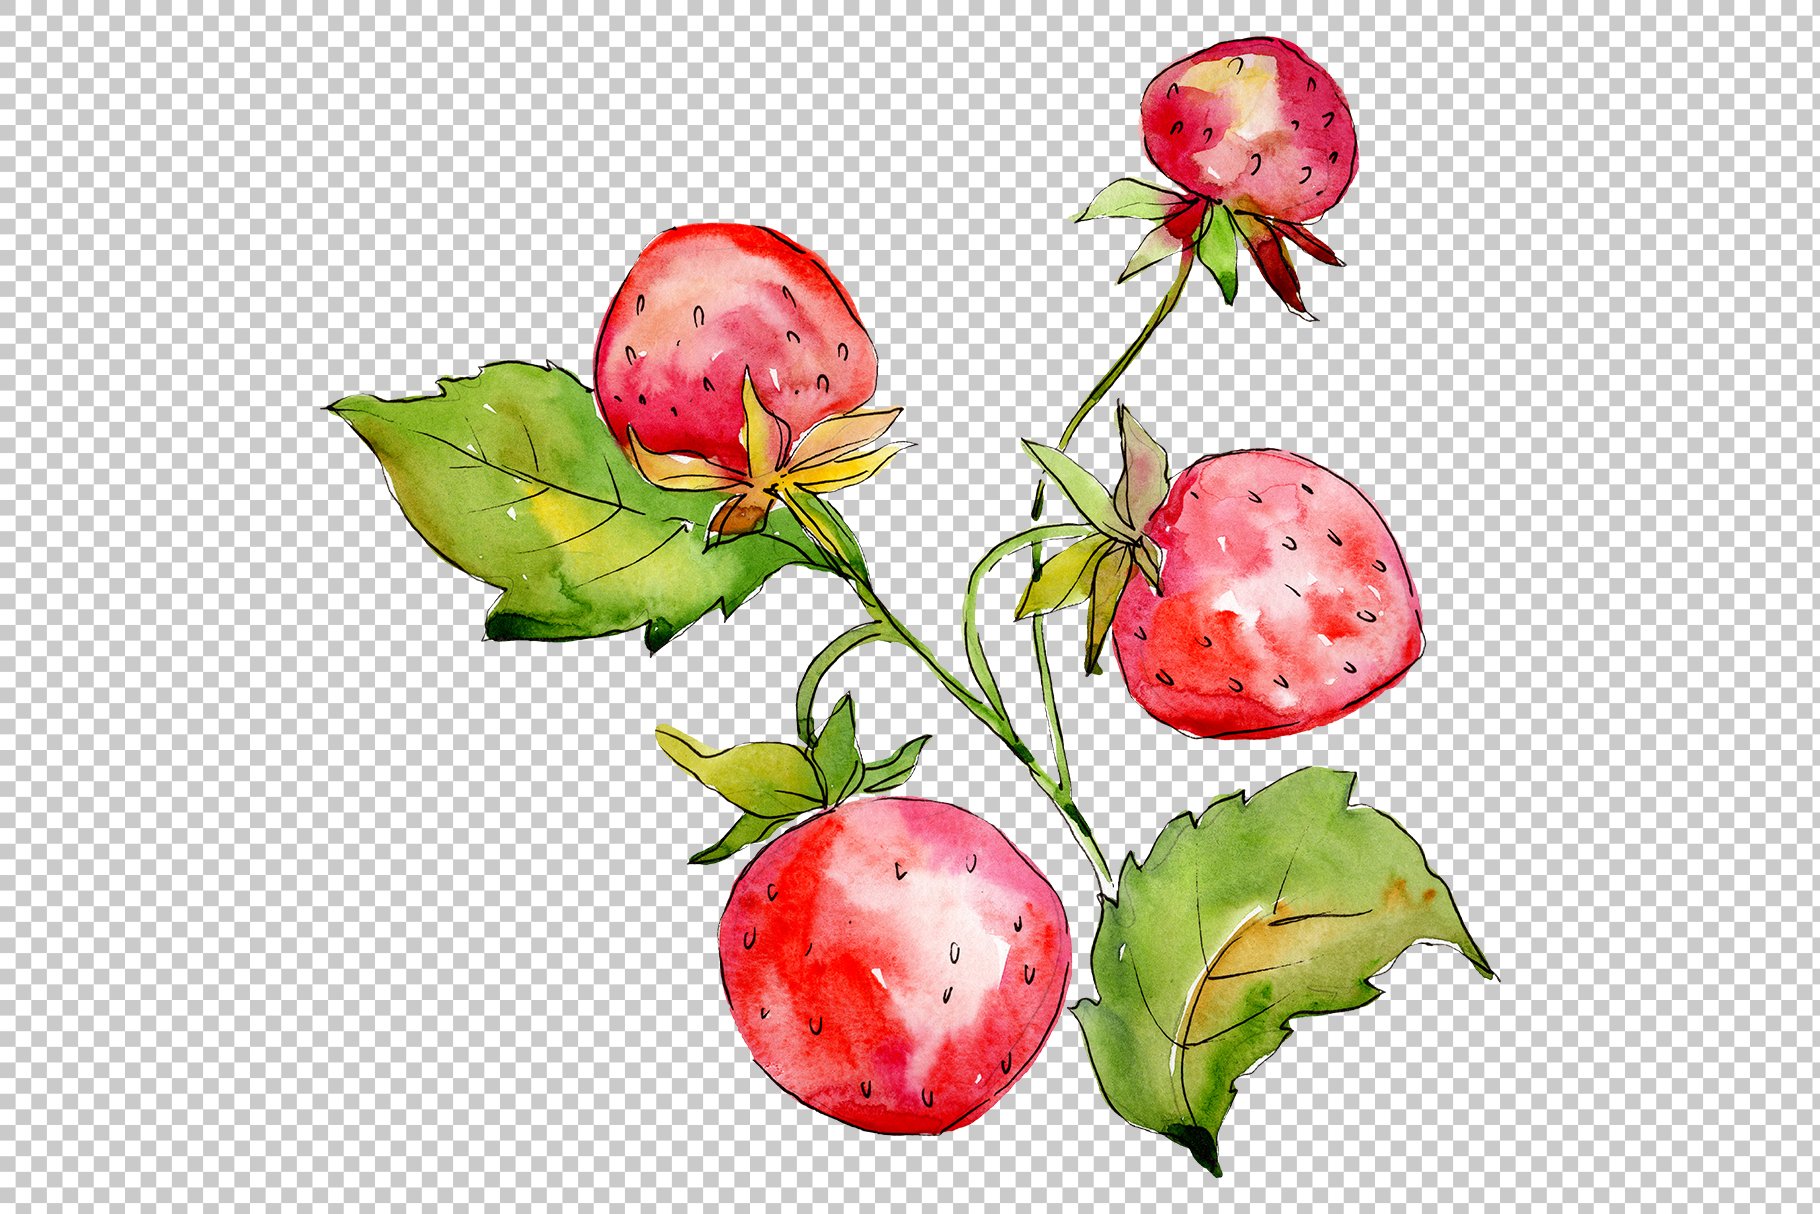 Transparent background with the strawberries illustration.